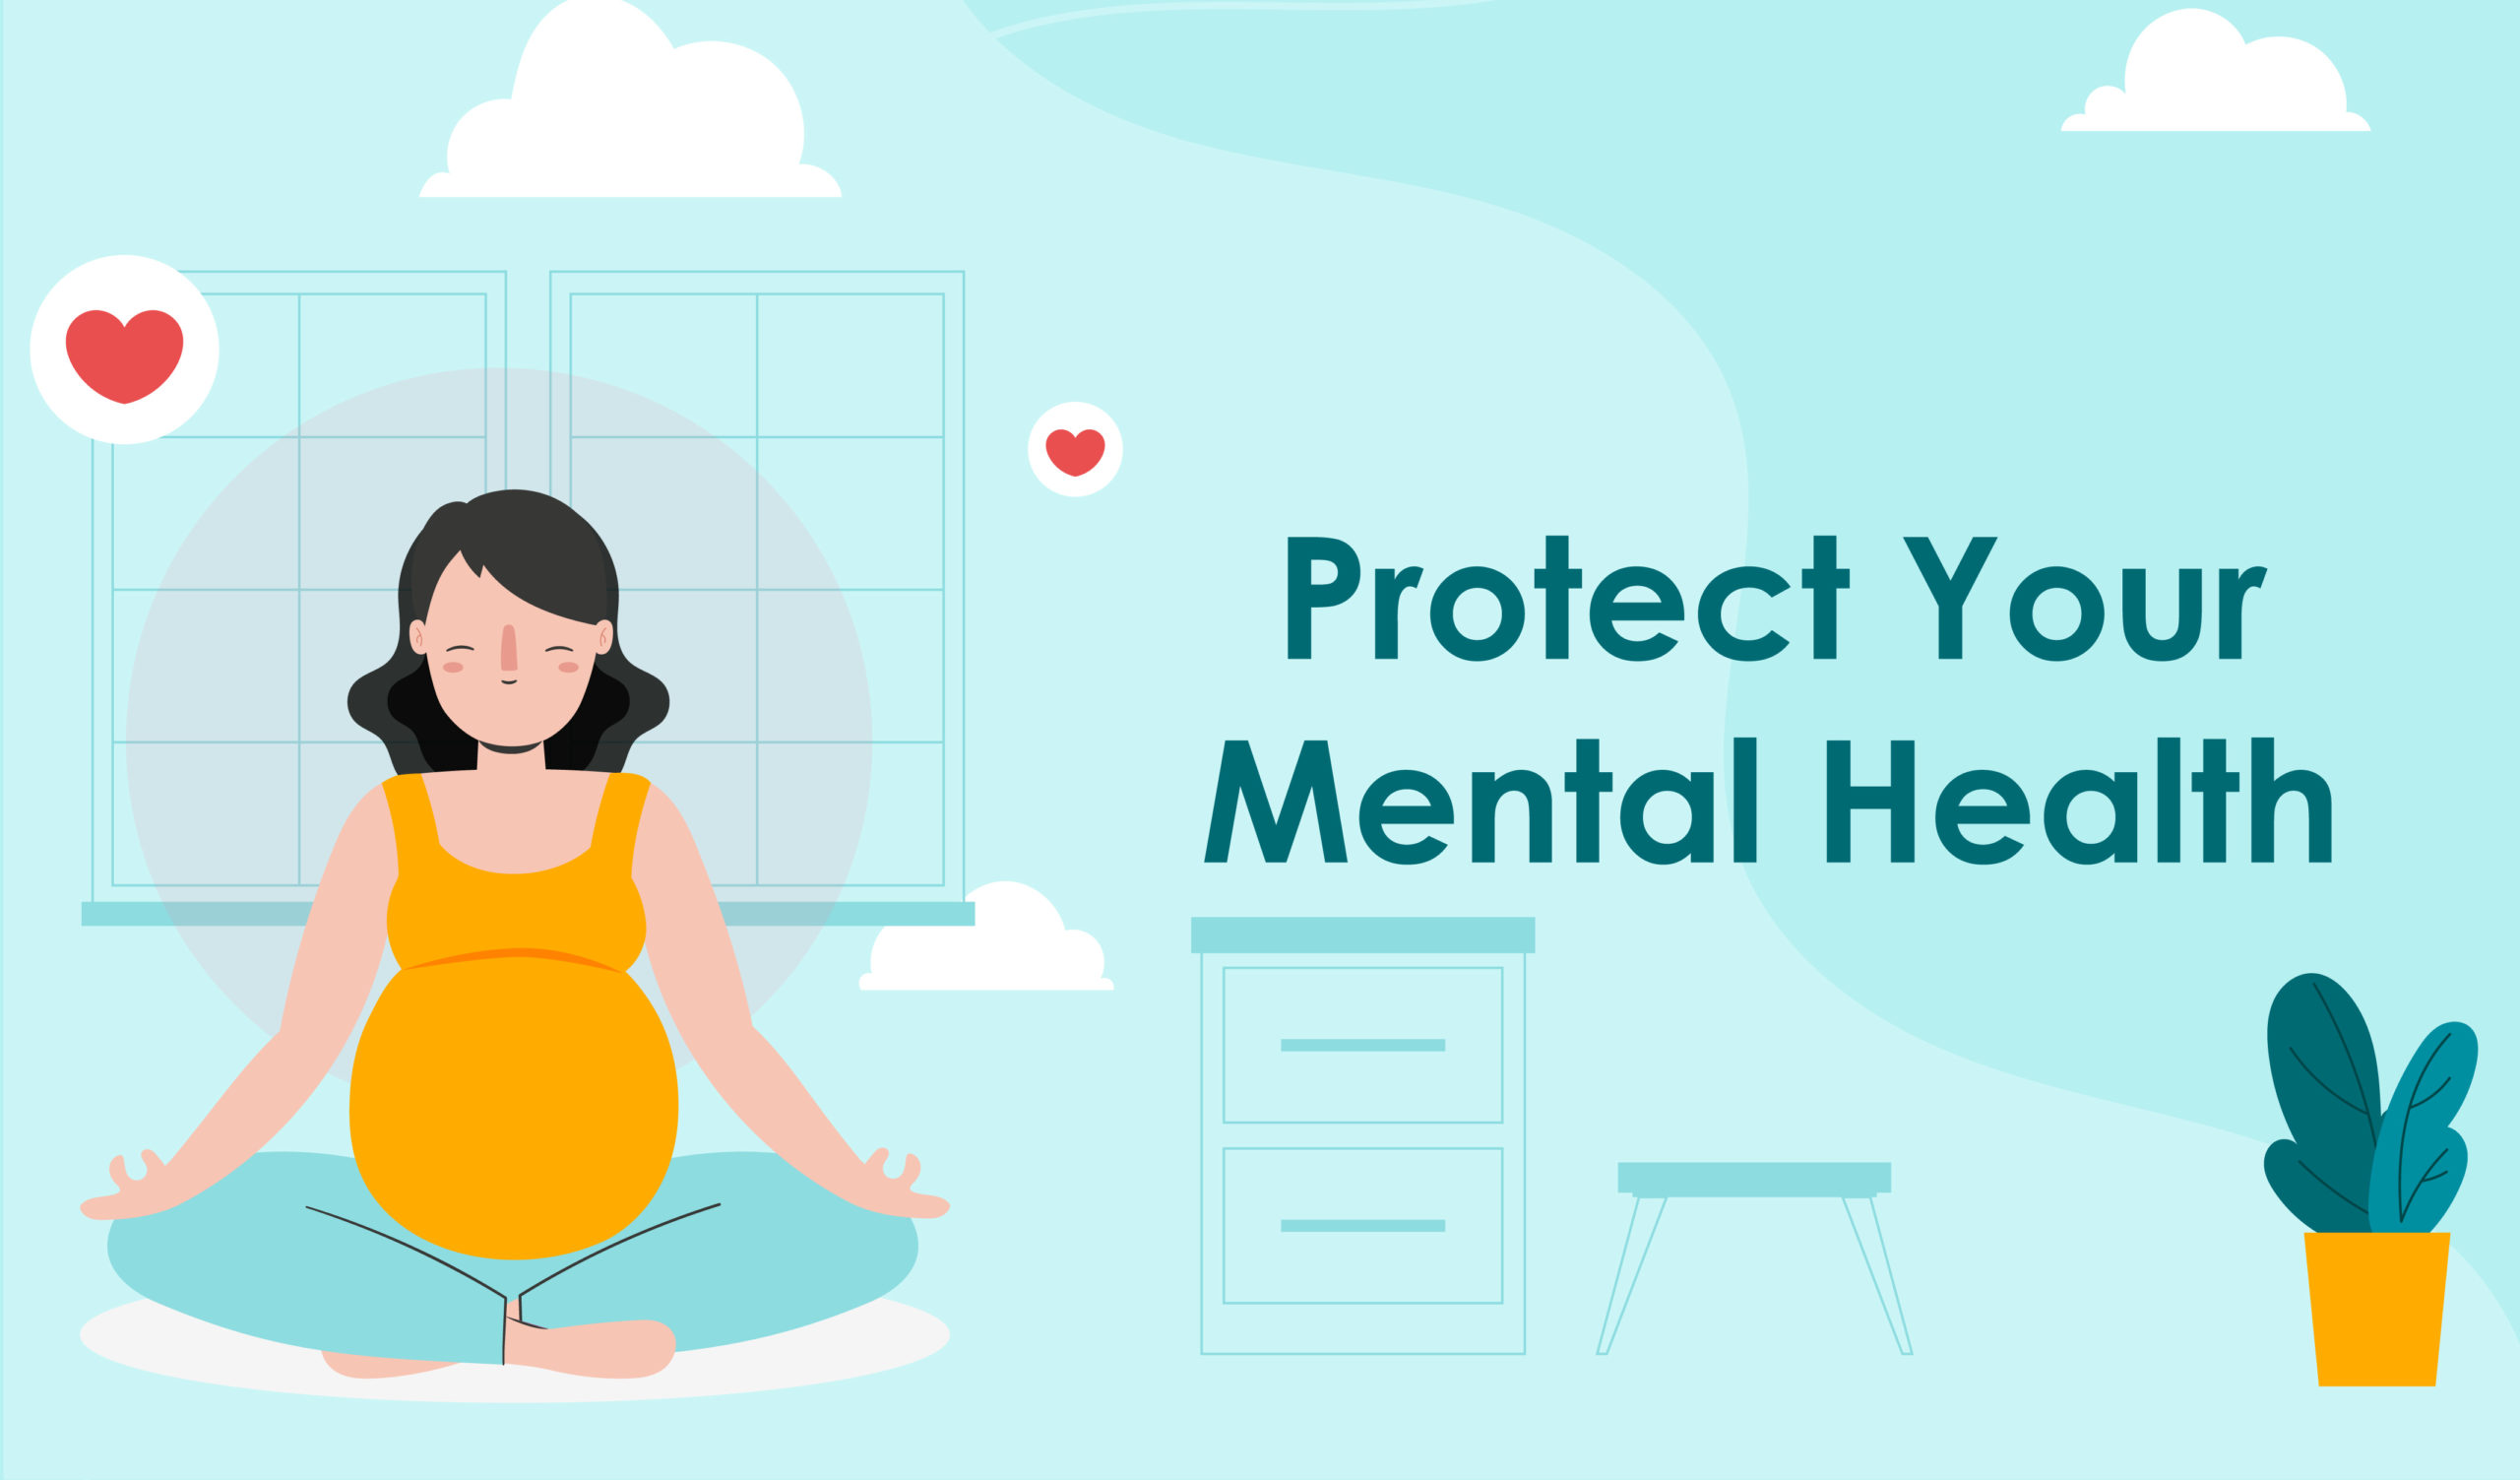 Protect your mental health